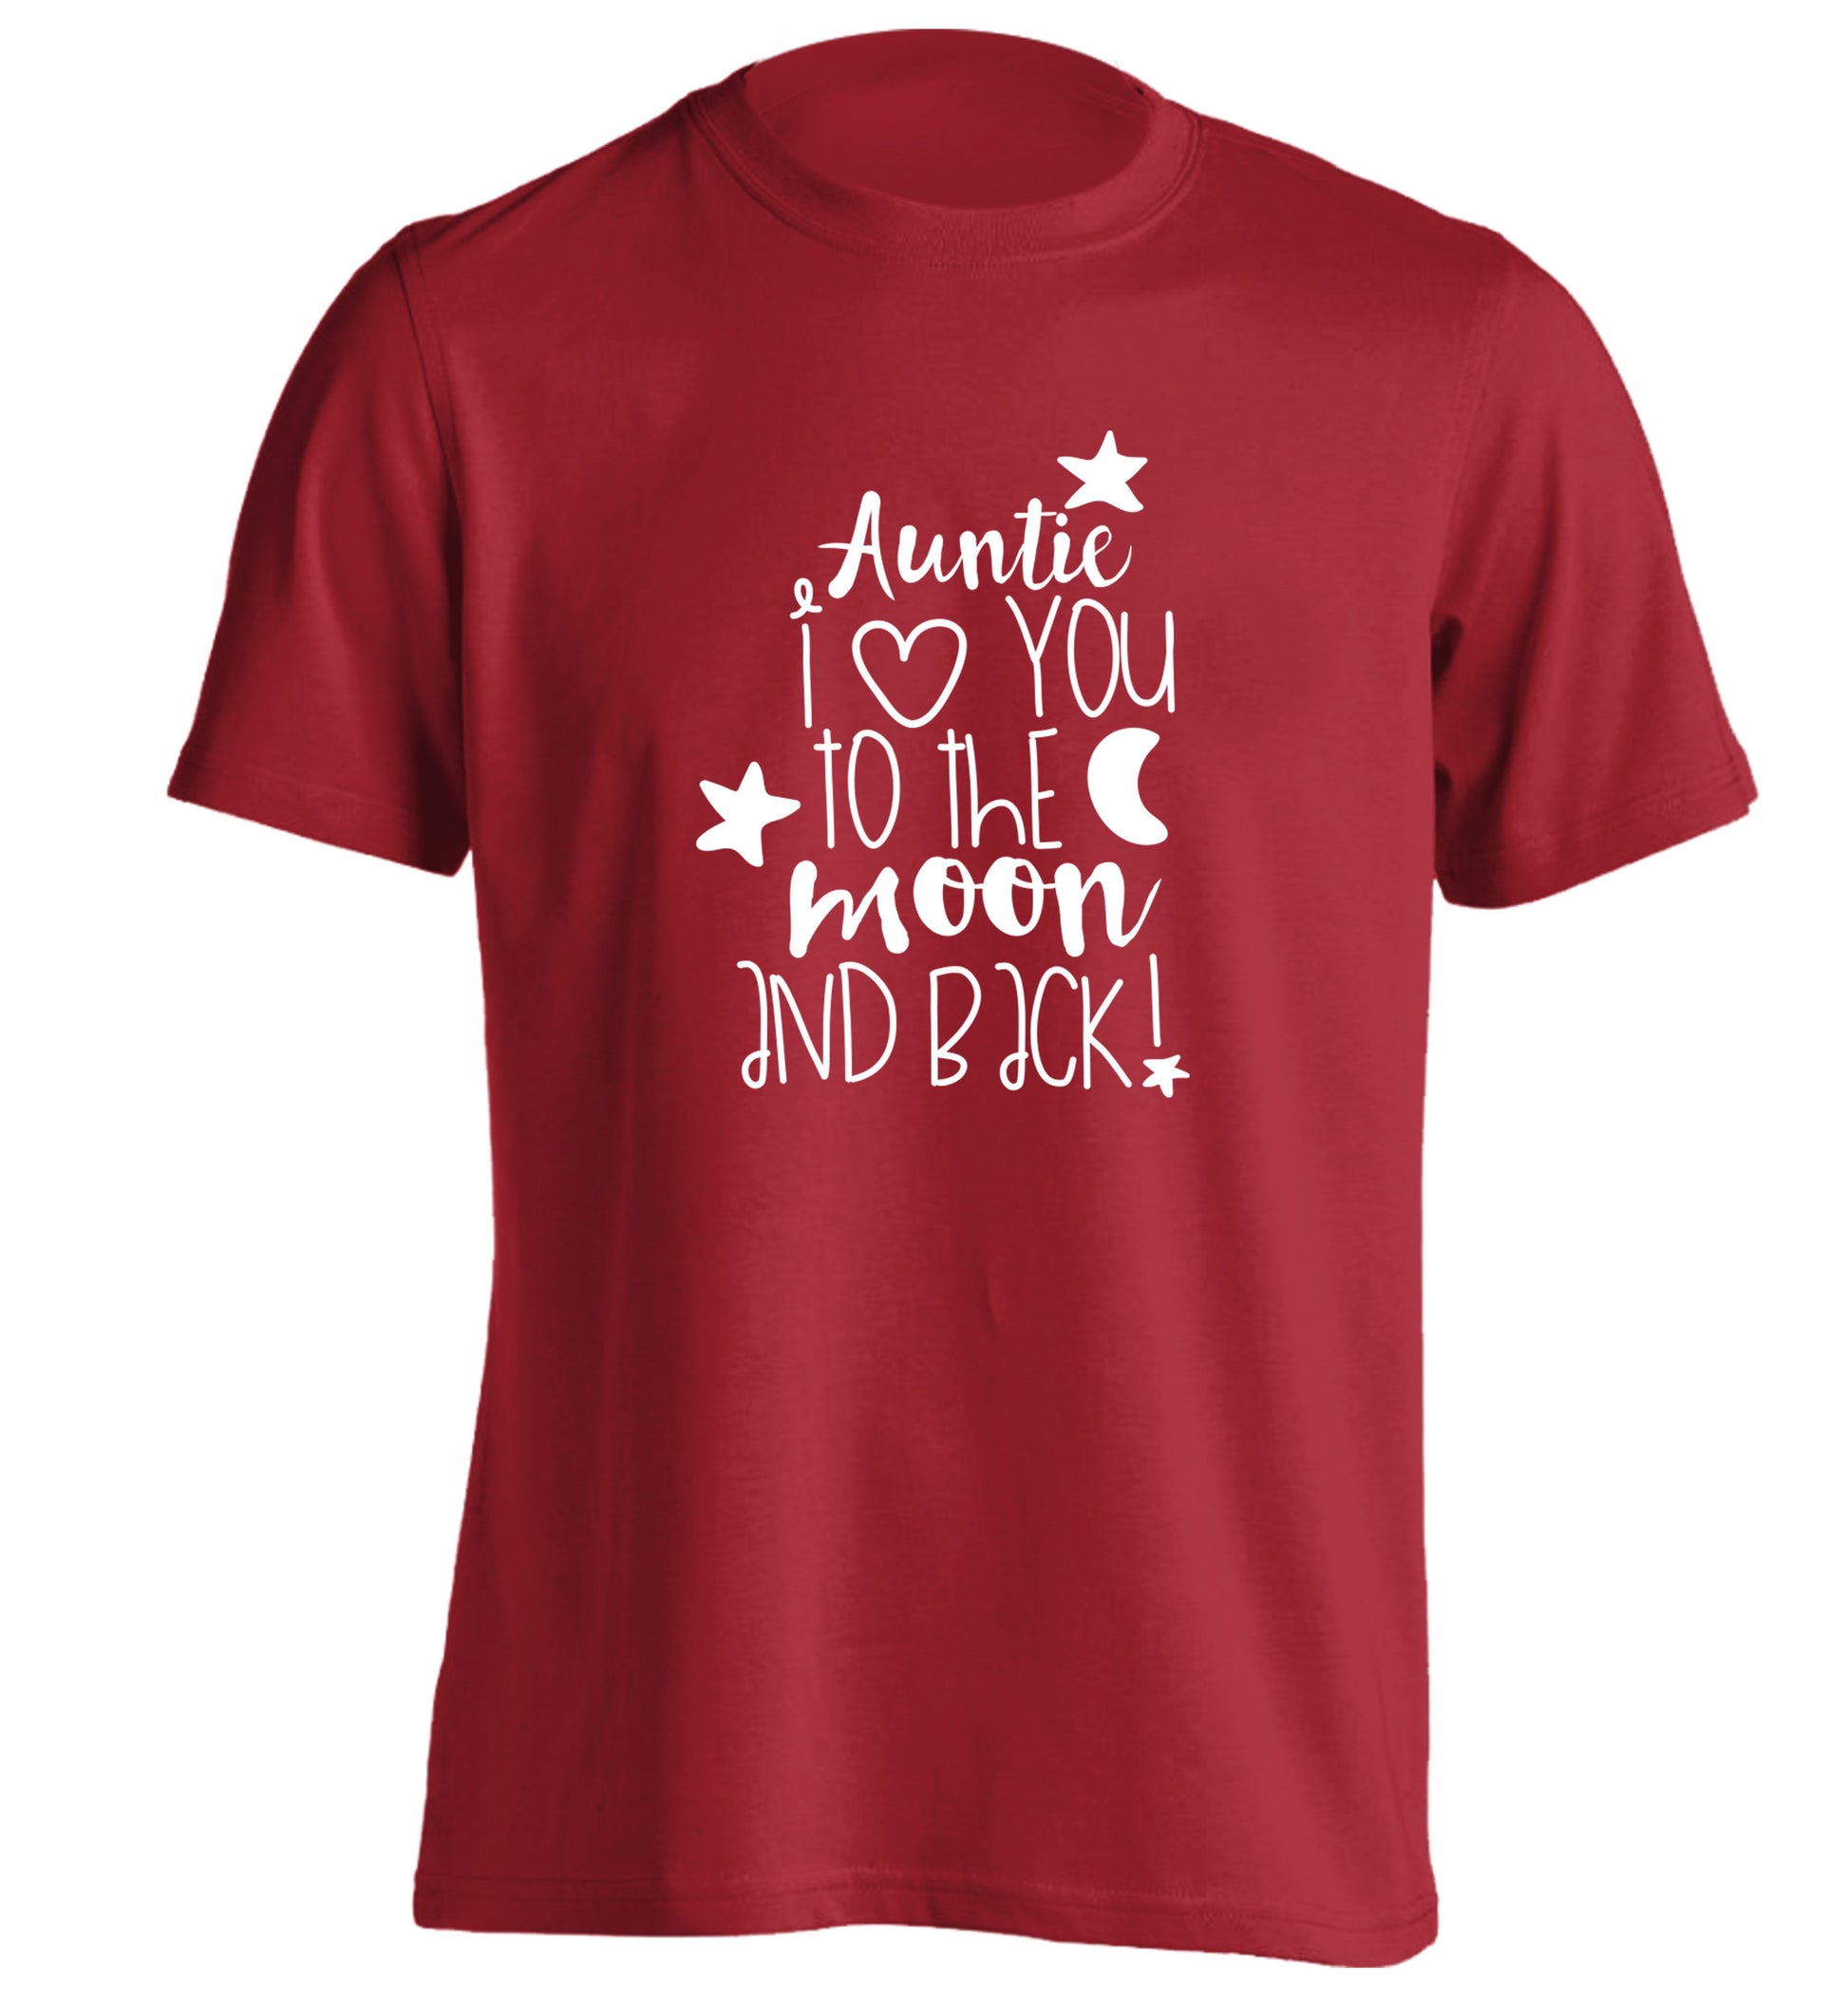 Auntie I love you to the moon and back adults unisex red Tshirt 2XL